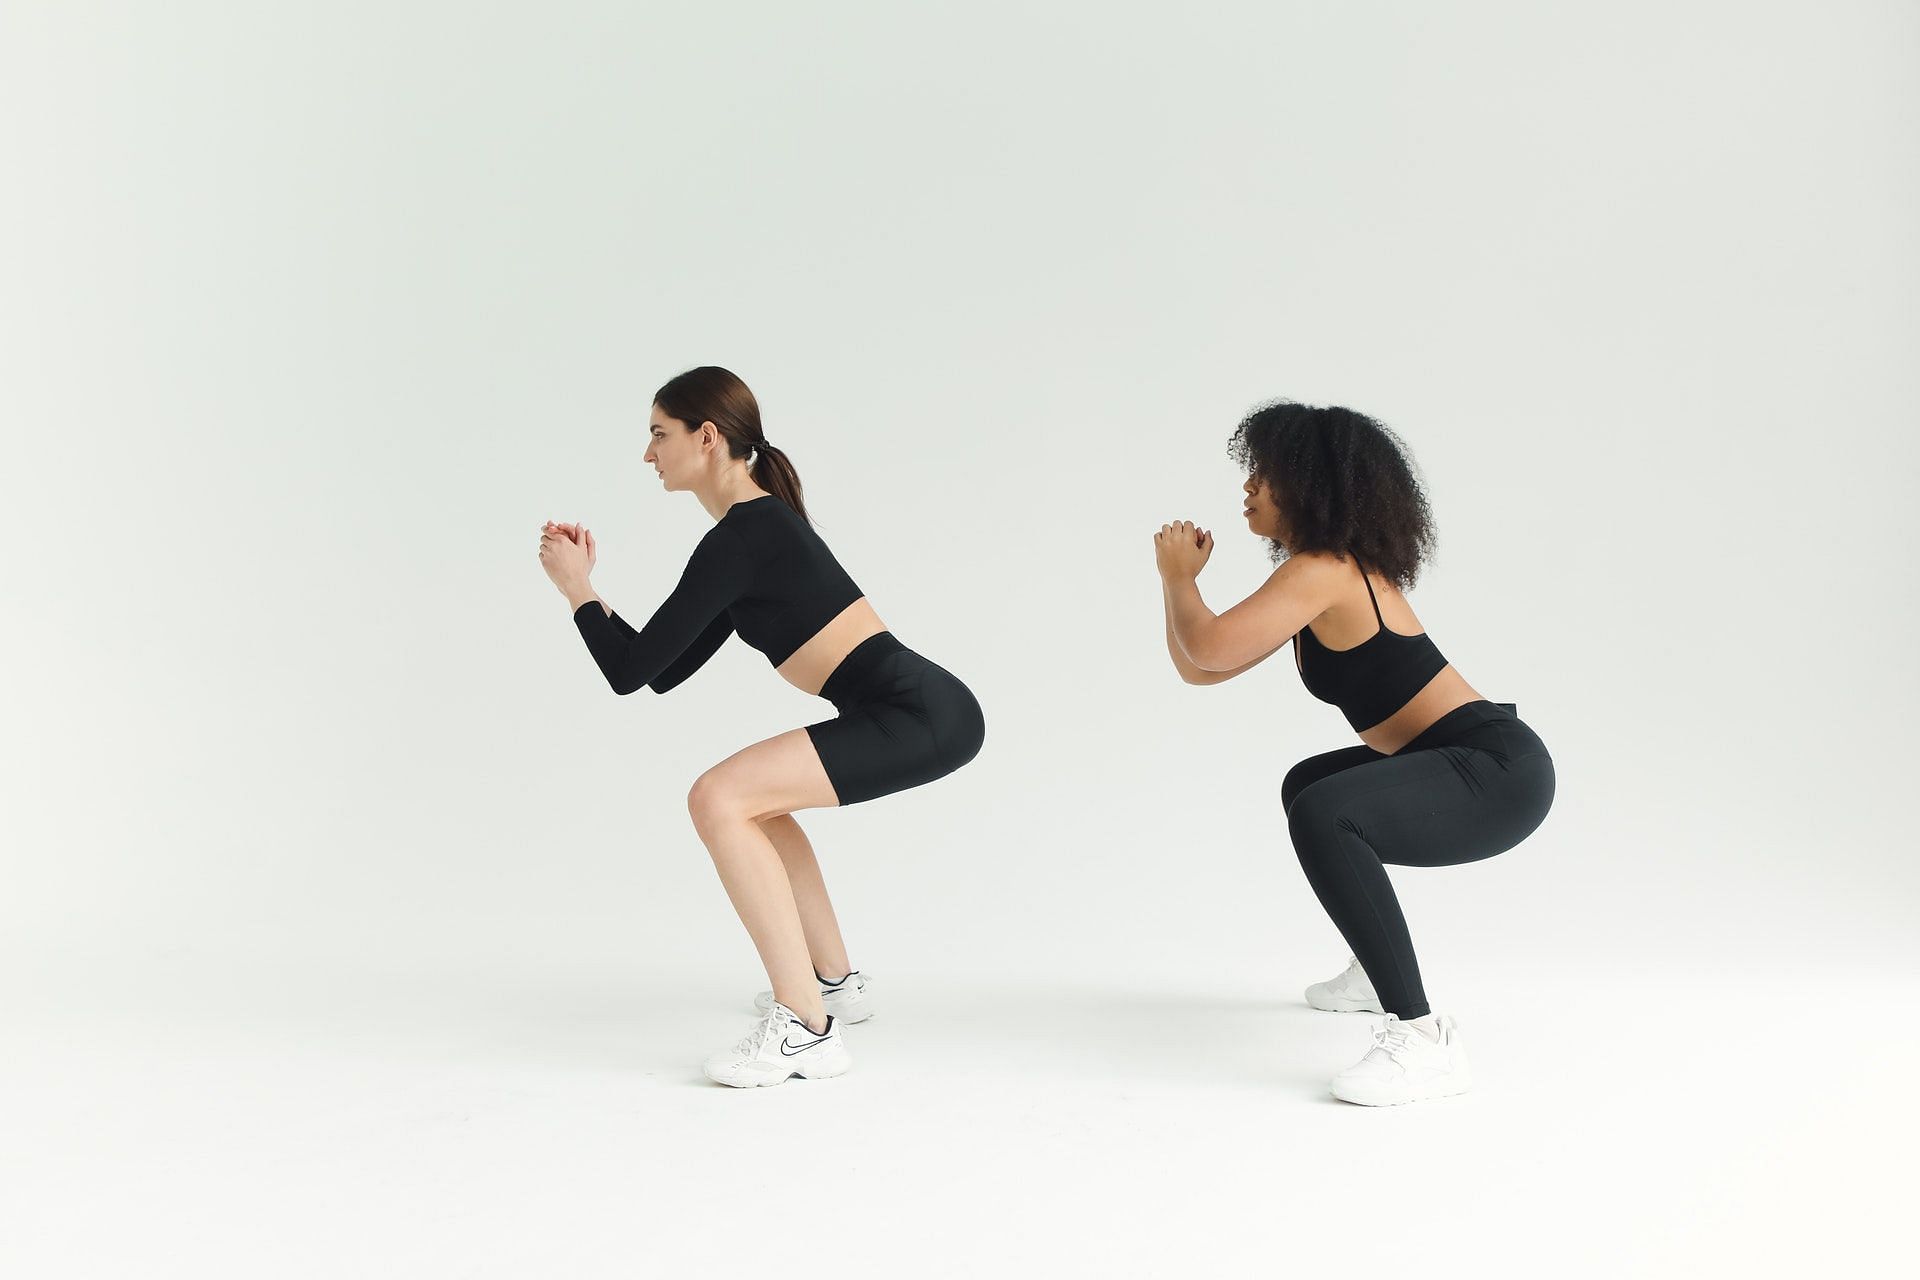 Squat jumps are powerful moves that help strengthen the lower body. (Photo by Polina Tankilevitch via pexels)